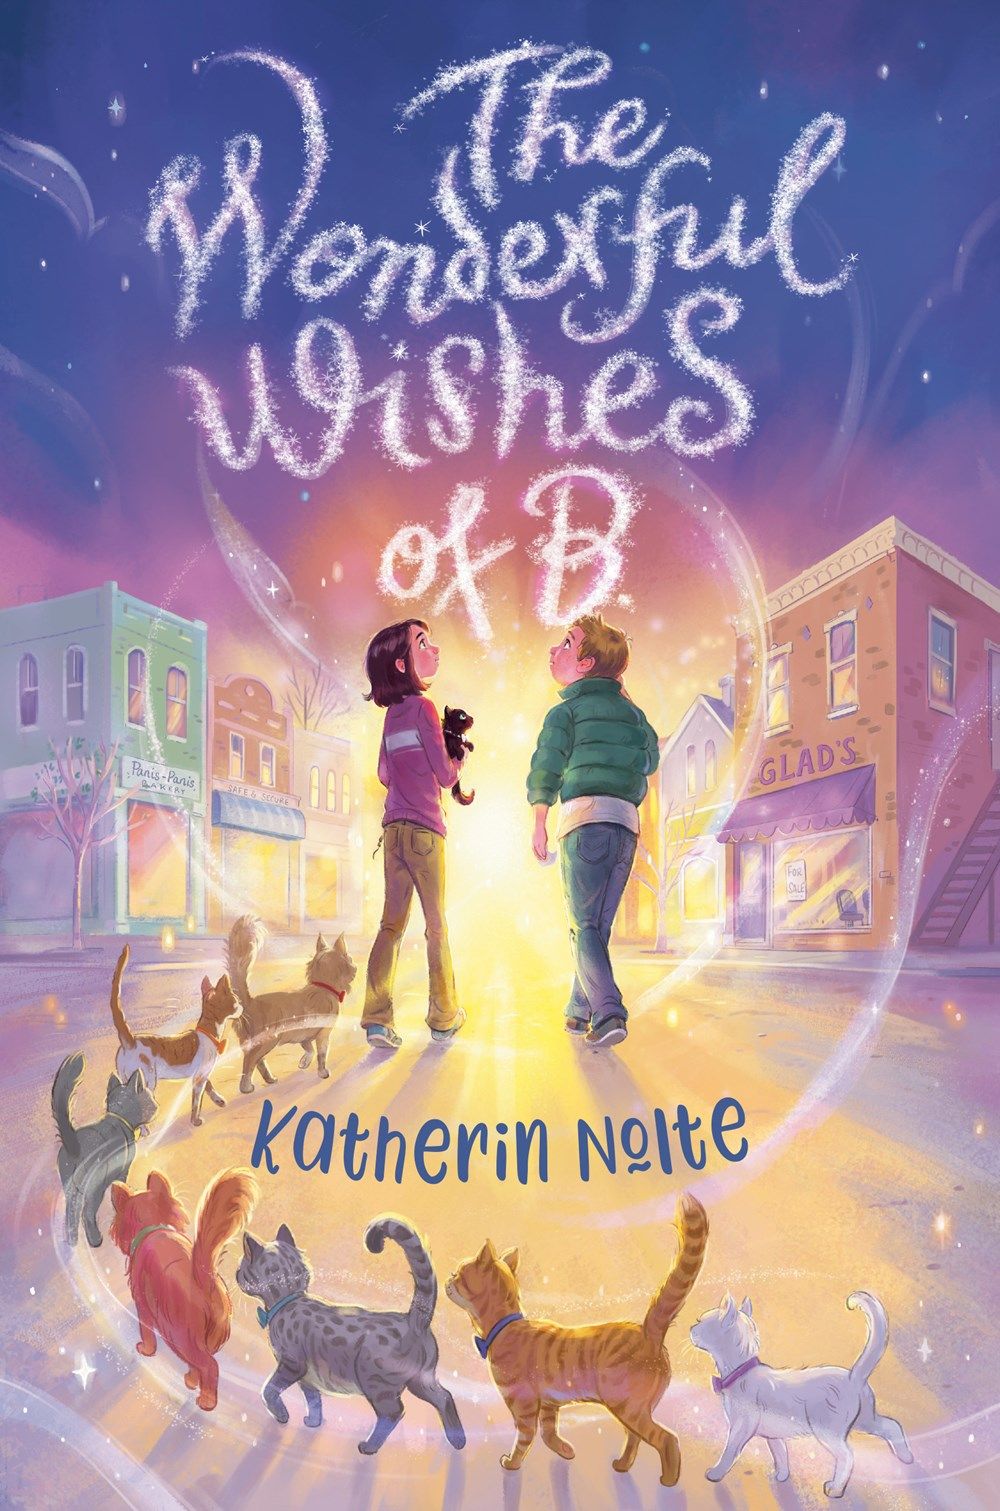 Cover of The Wonderful Wishes of B. by Katherin Nolte